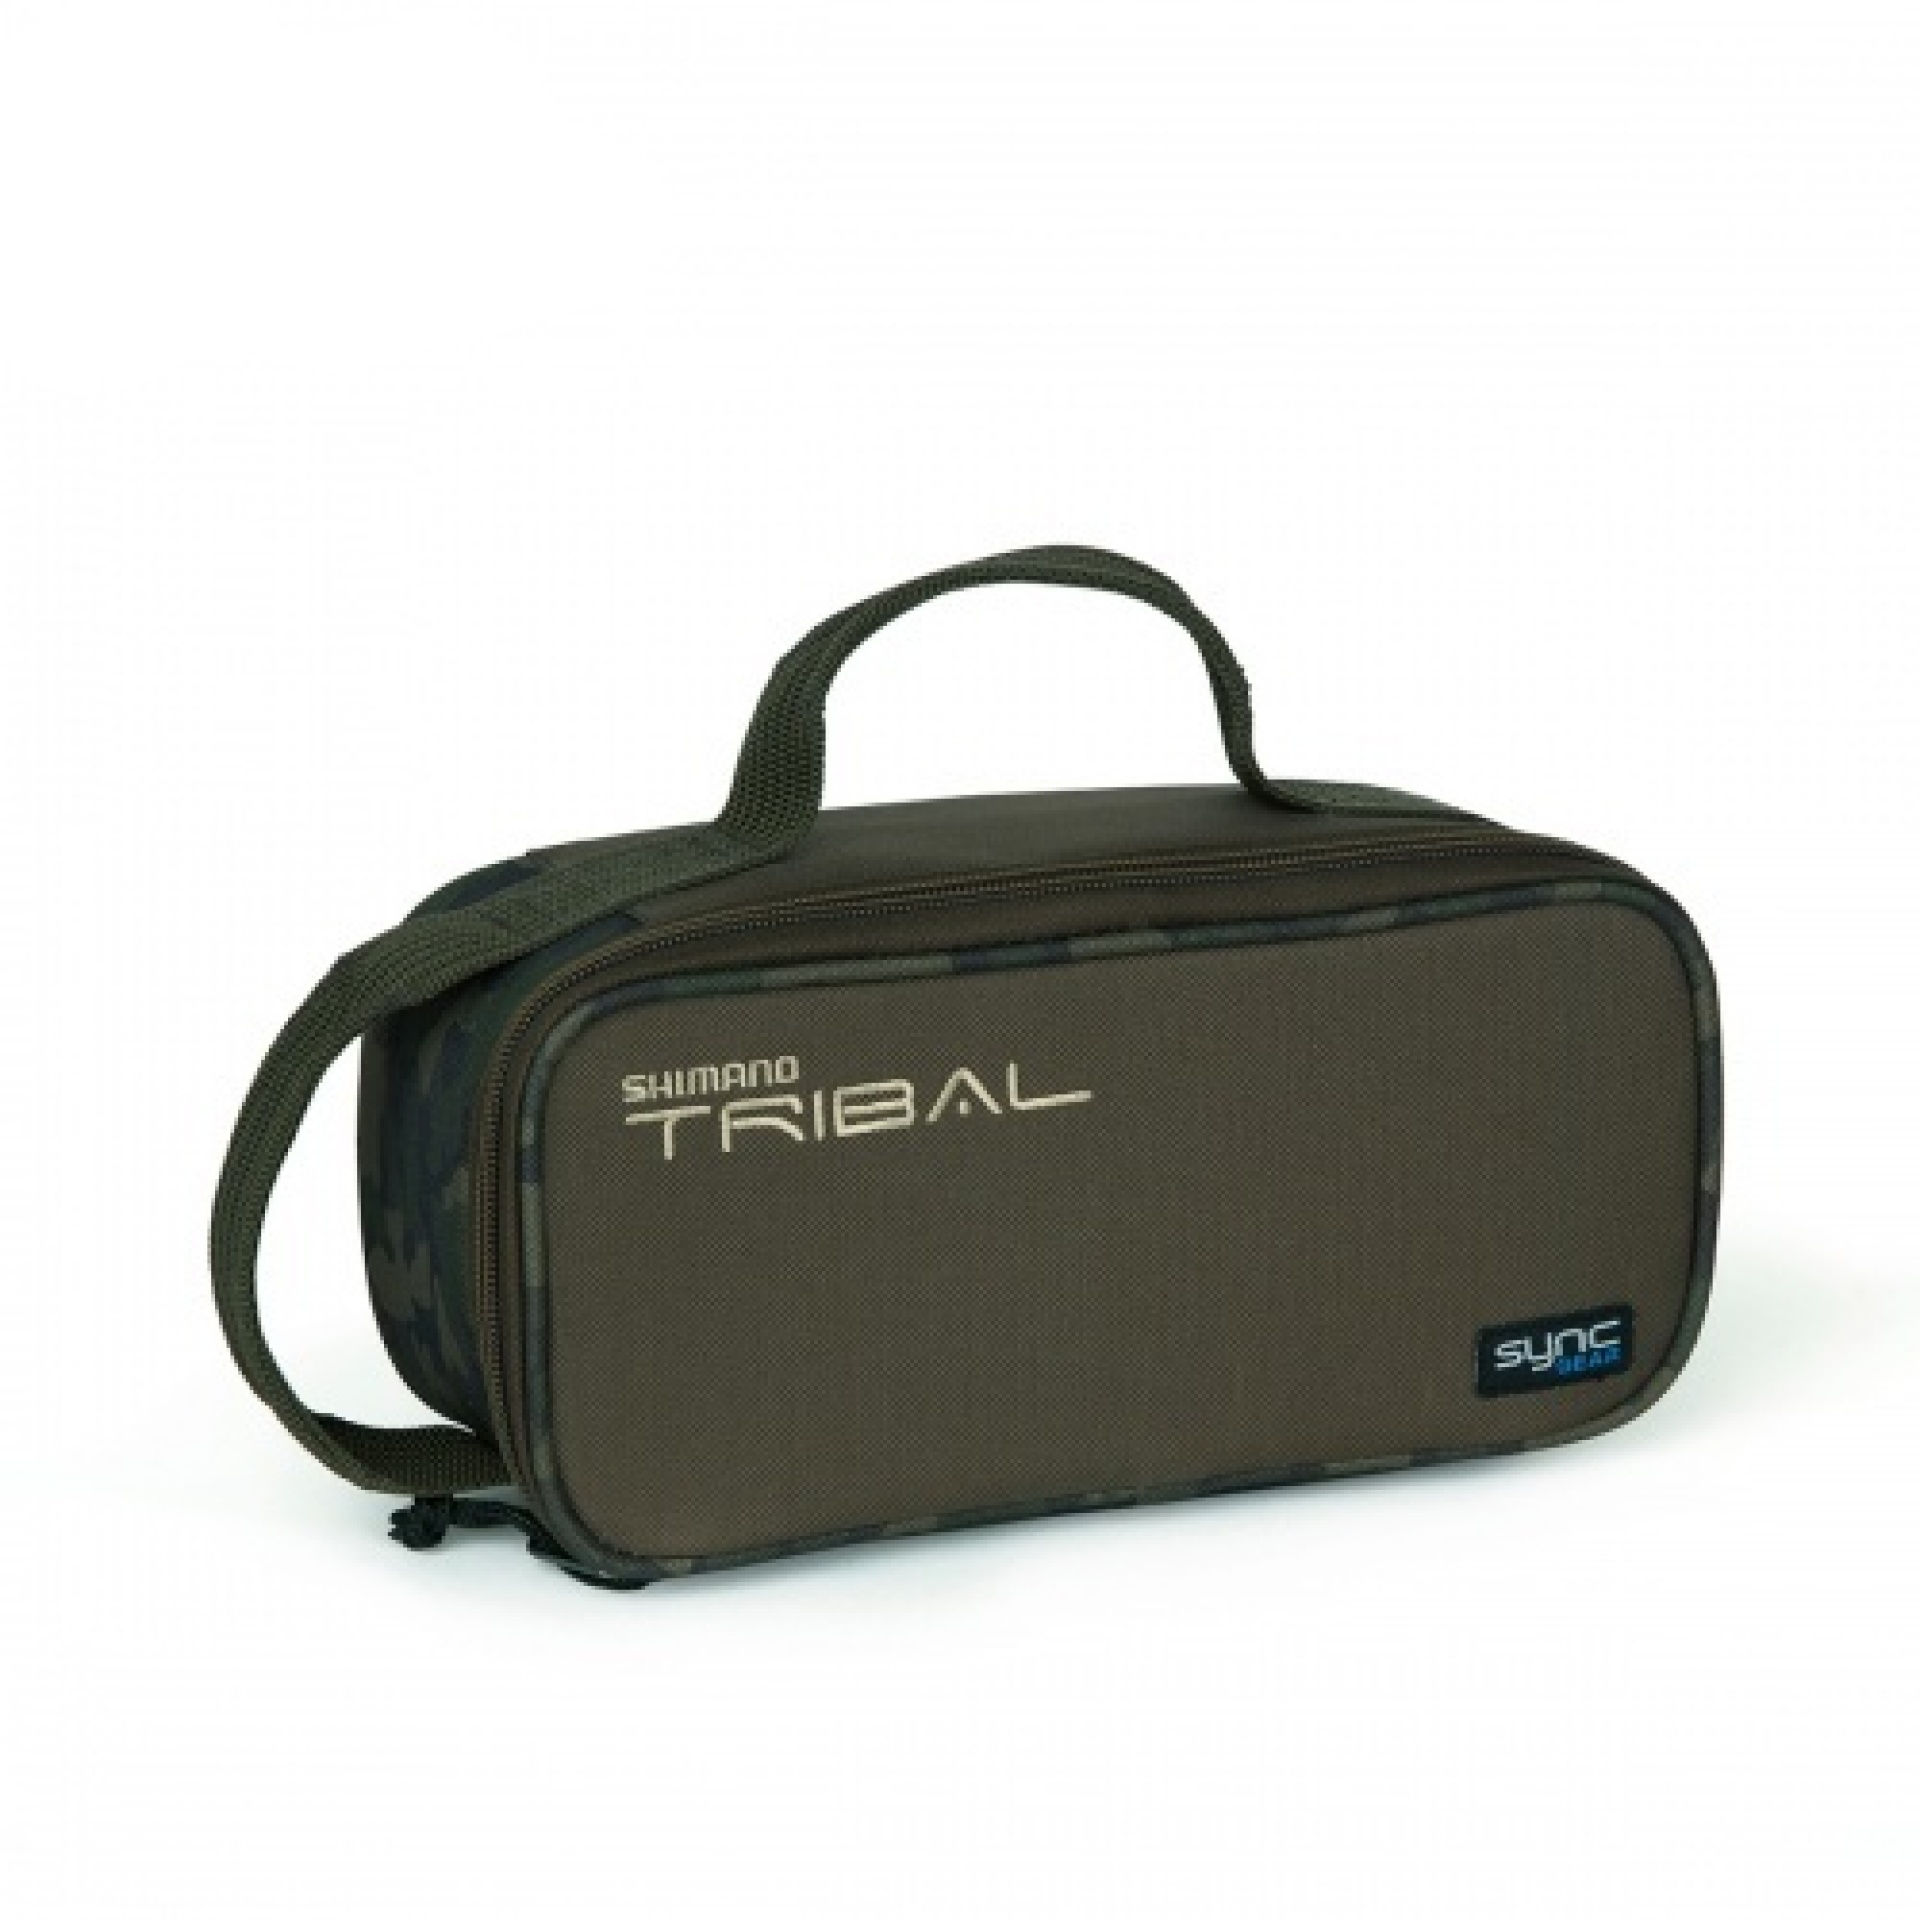 Shimano Tribal Sync Rig And Bits Case